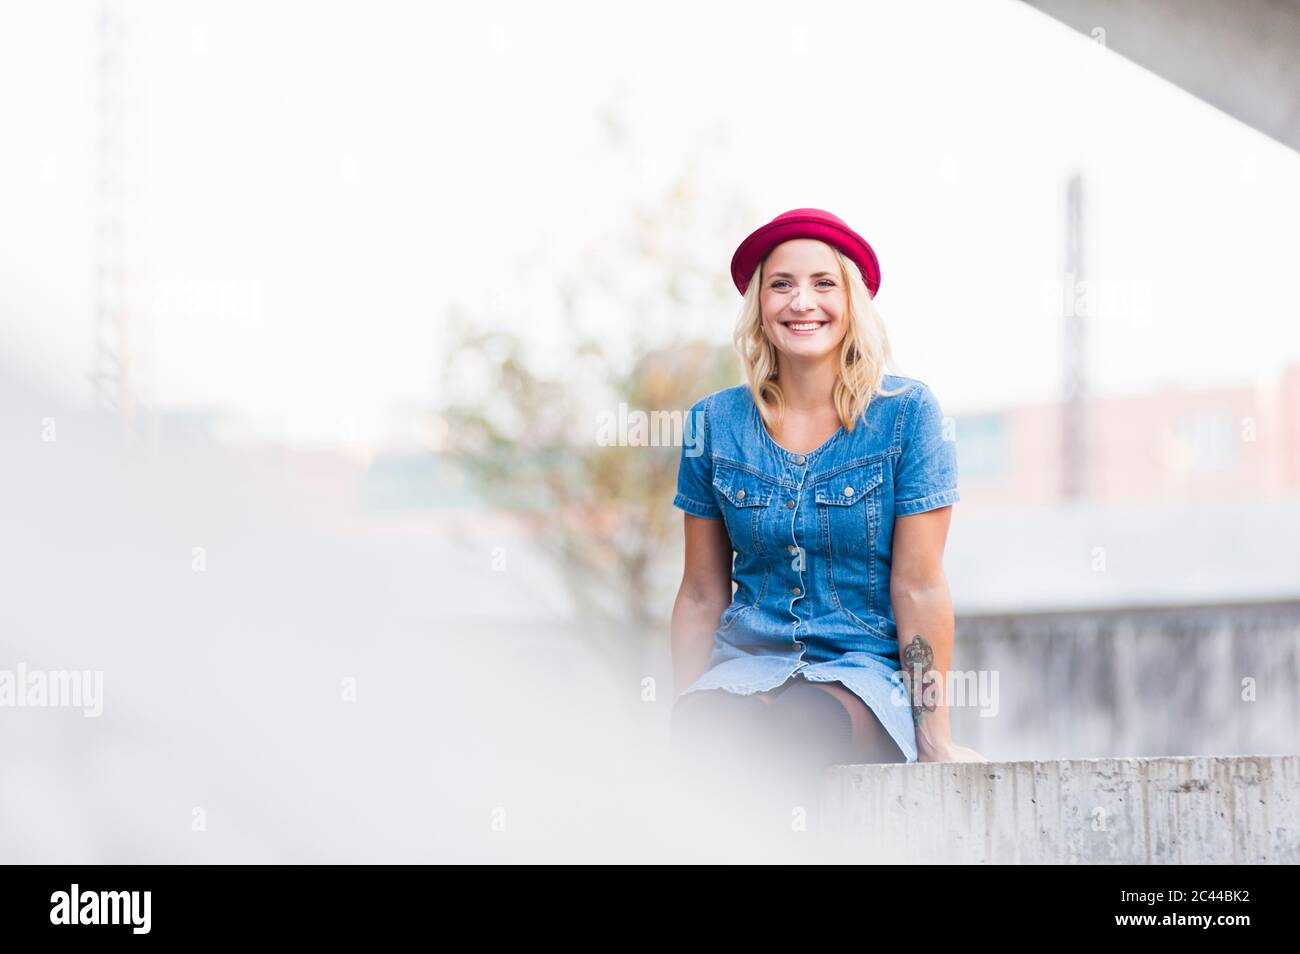 Portrait of happy young woman wearing denim dress sitting on a wall Stock Photo